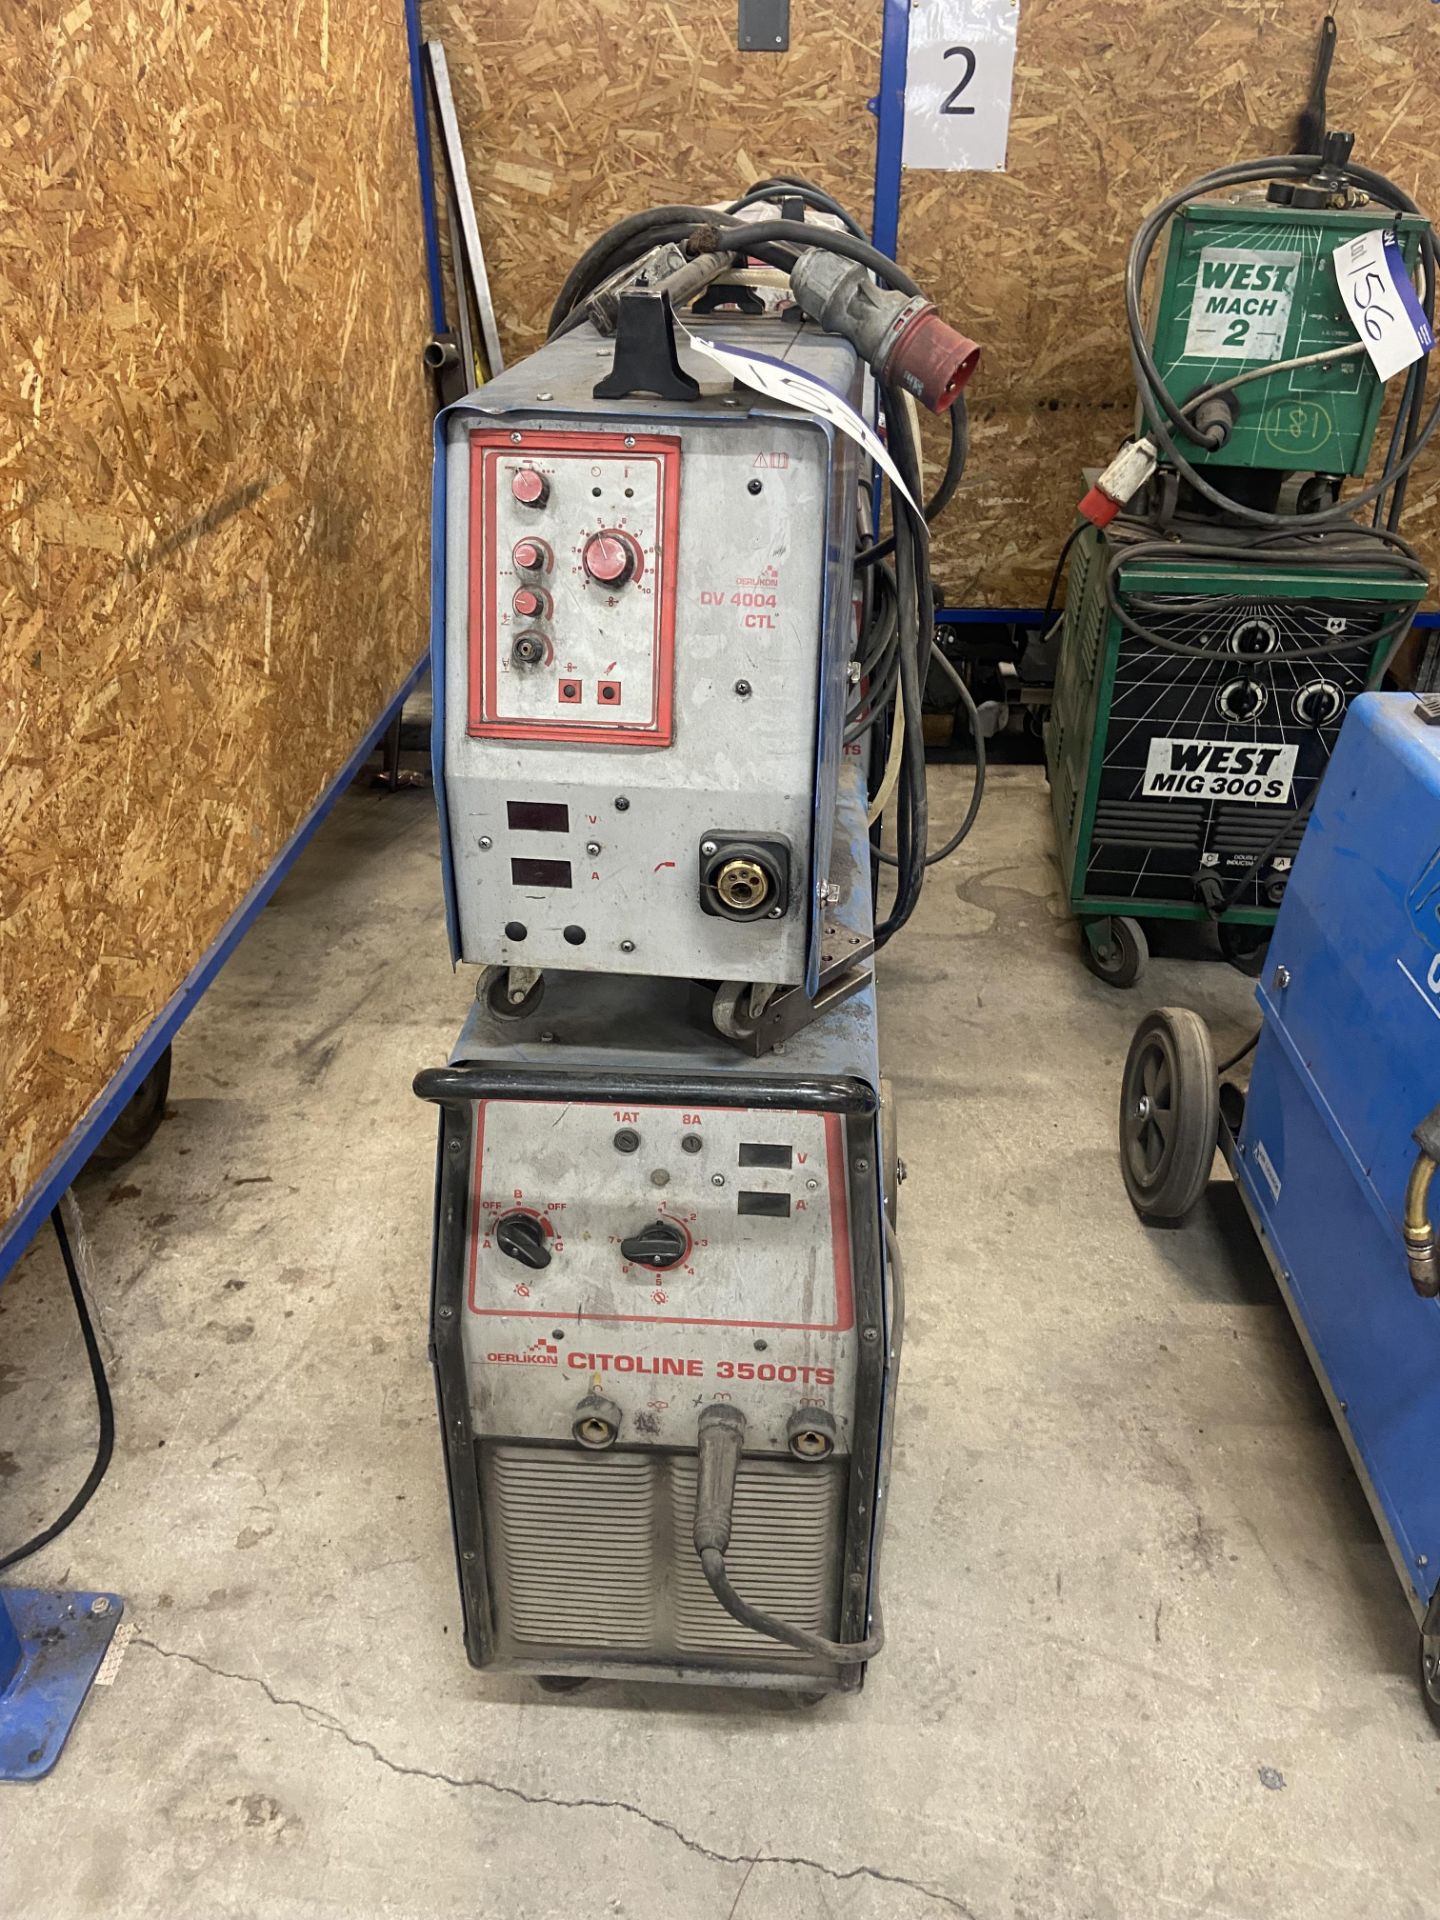 Oerlikon Citoline 3500TS Mig Welding Set, serial no. 216/4848841, with DV4004 CTL wire feed unit - Image 2 of 4